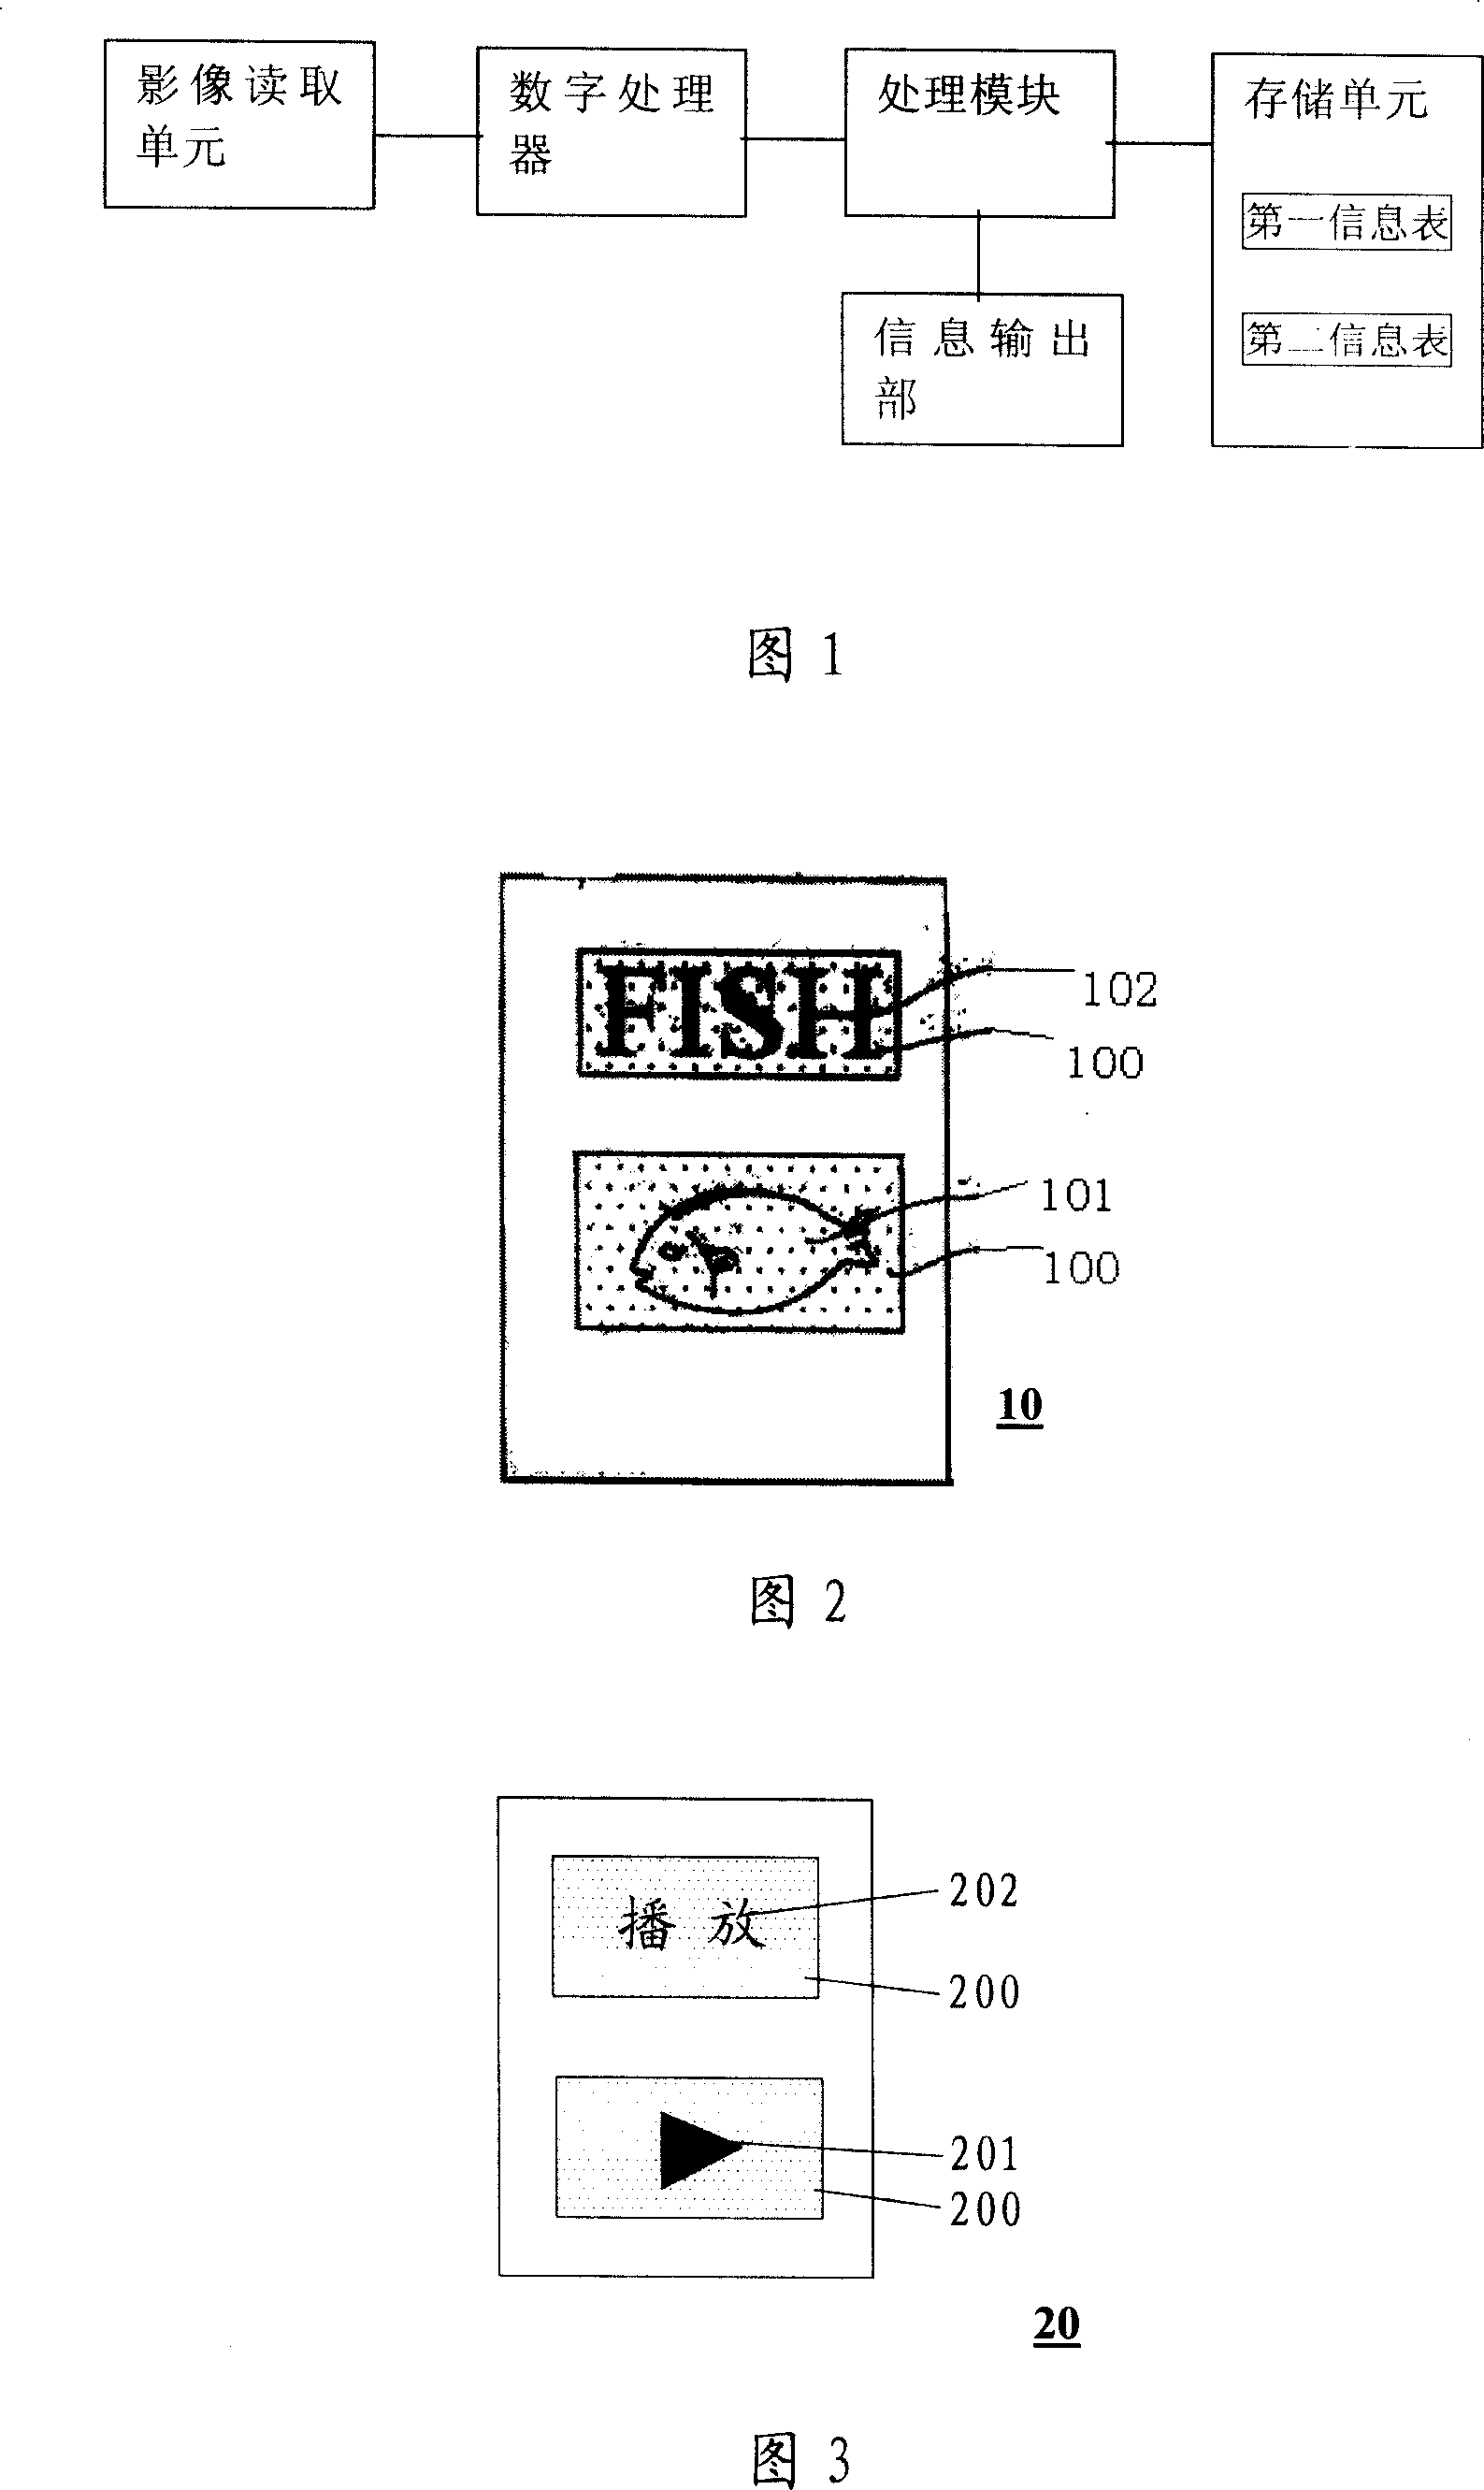 Implementing controlled click-to-read device using the reading video coding